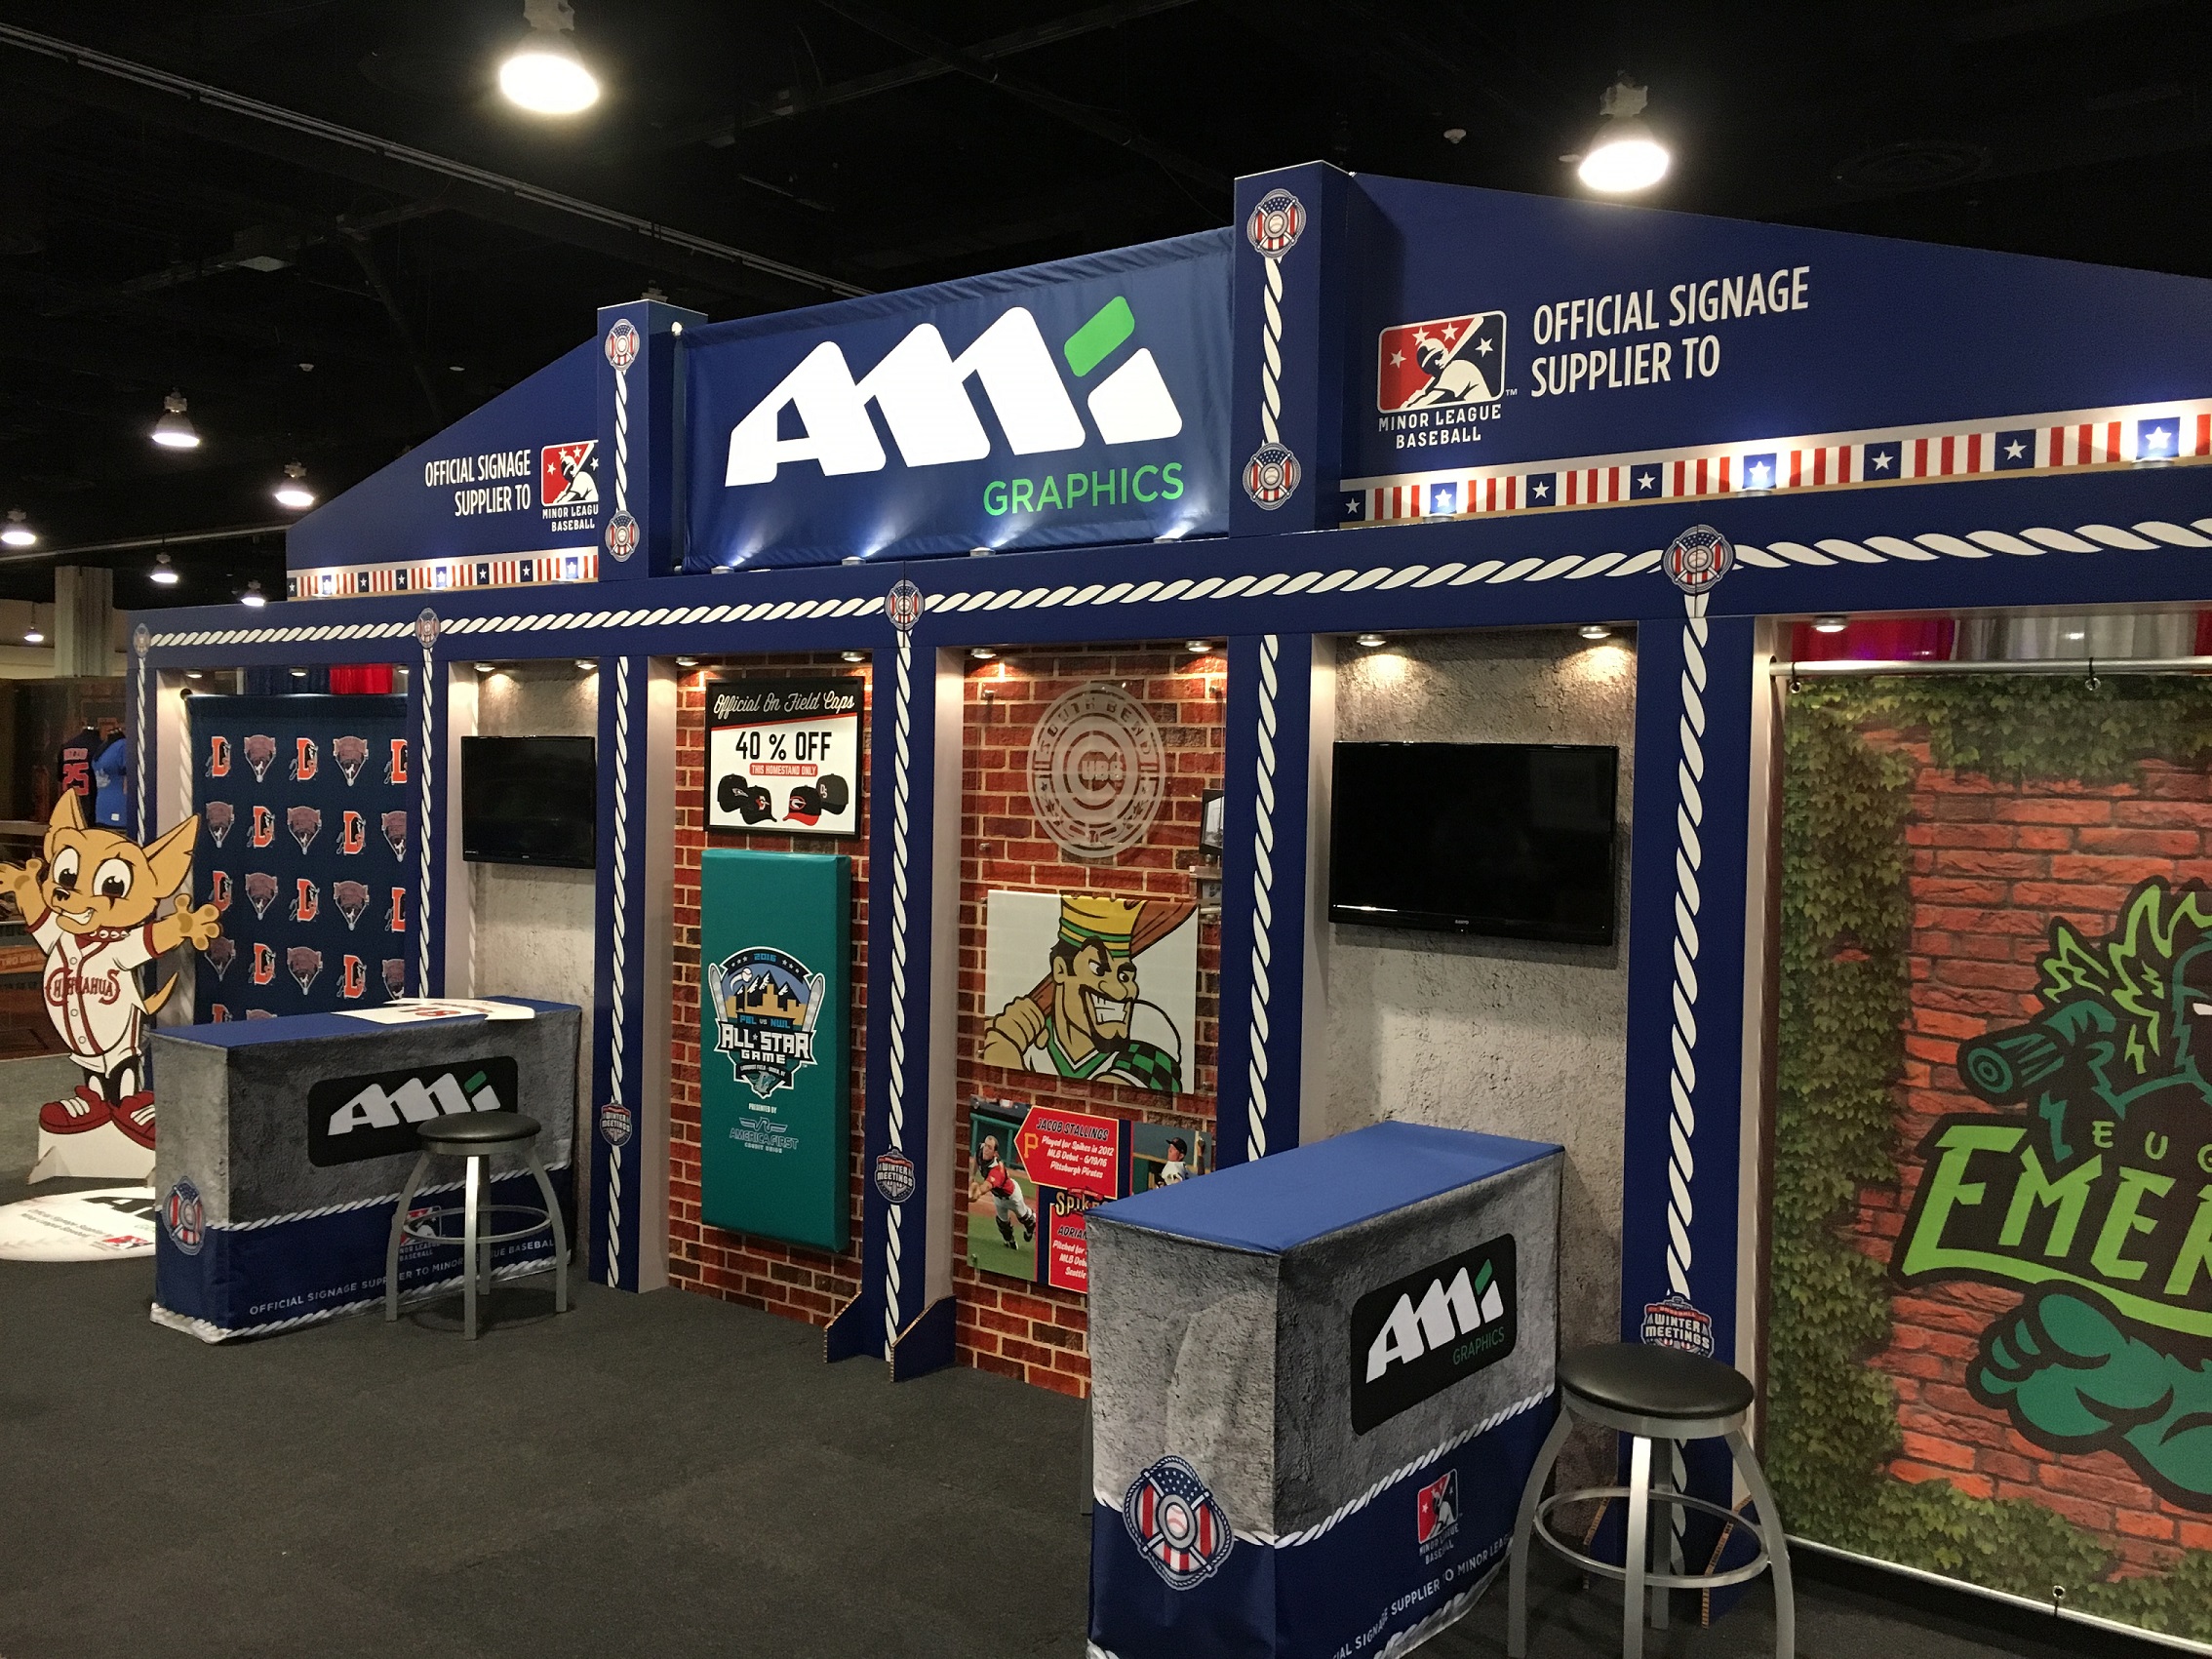 See The AMI Team at Winter Meetings Booth #609 - AMI Graphics